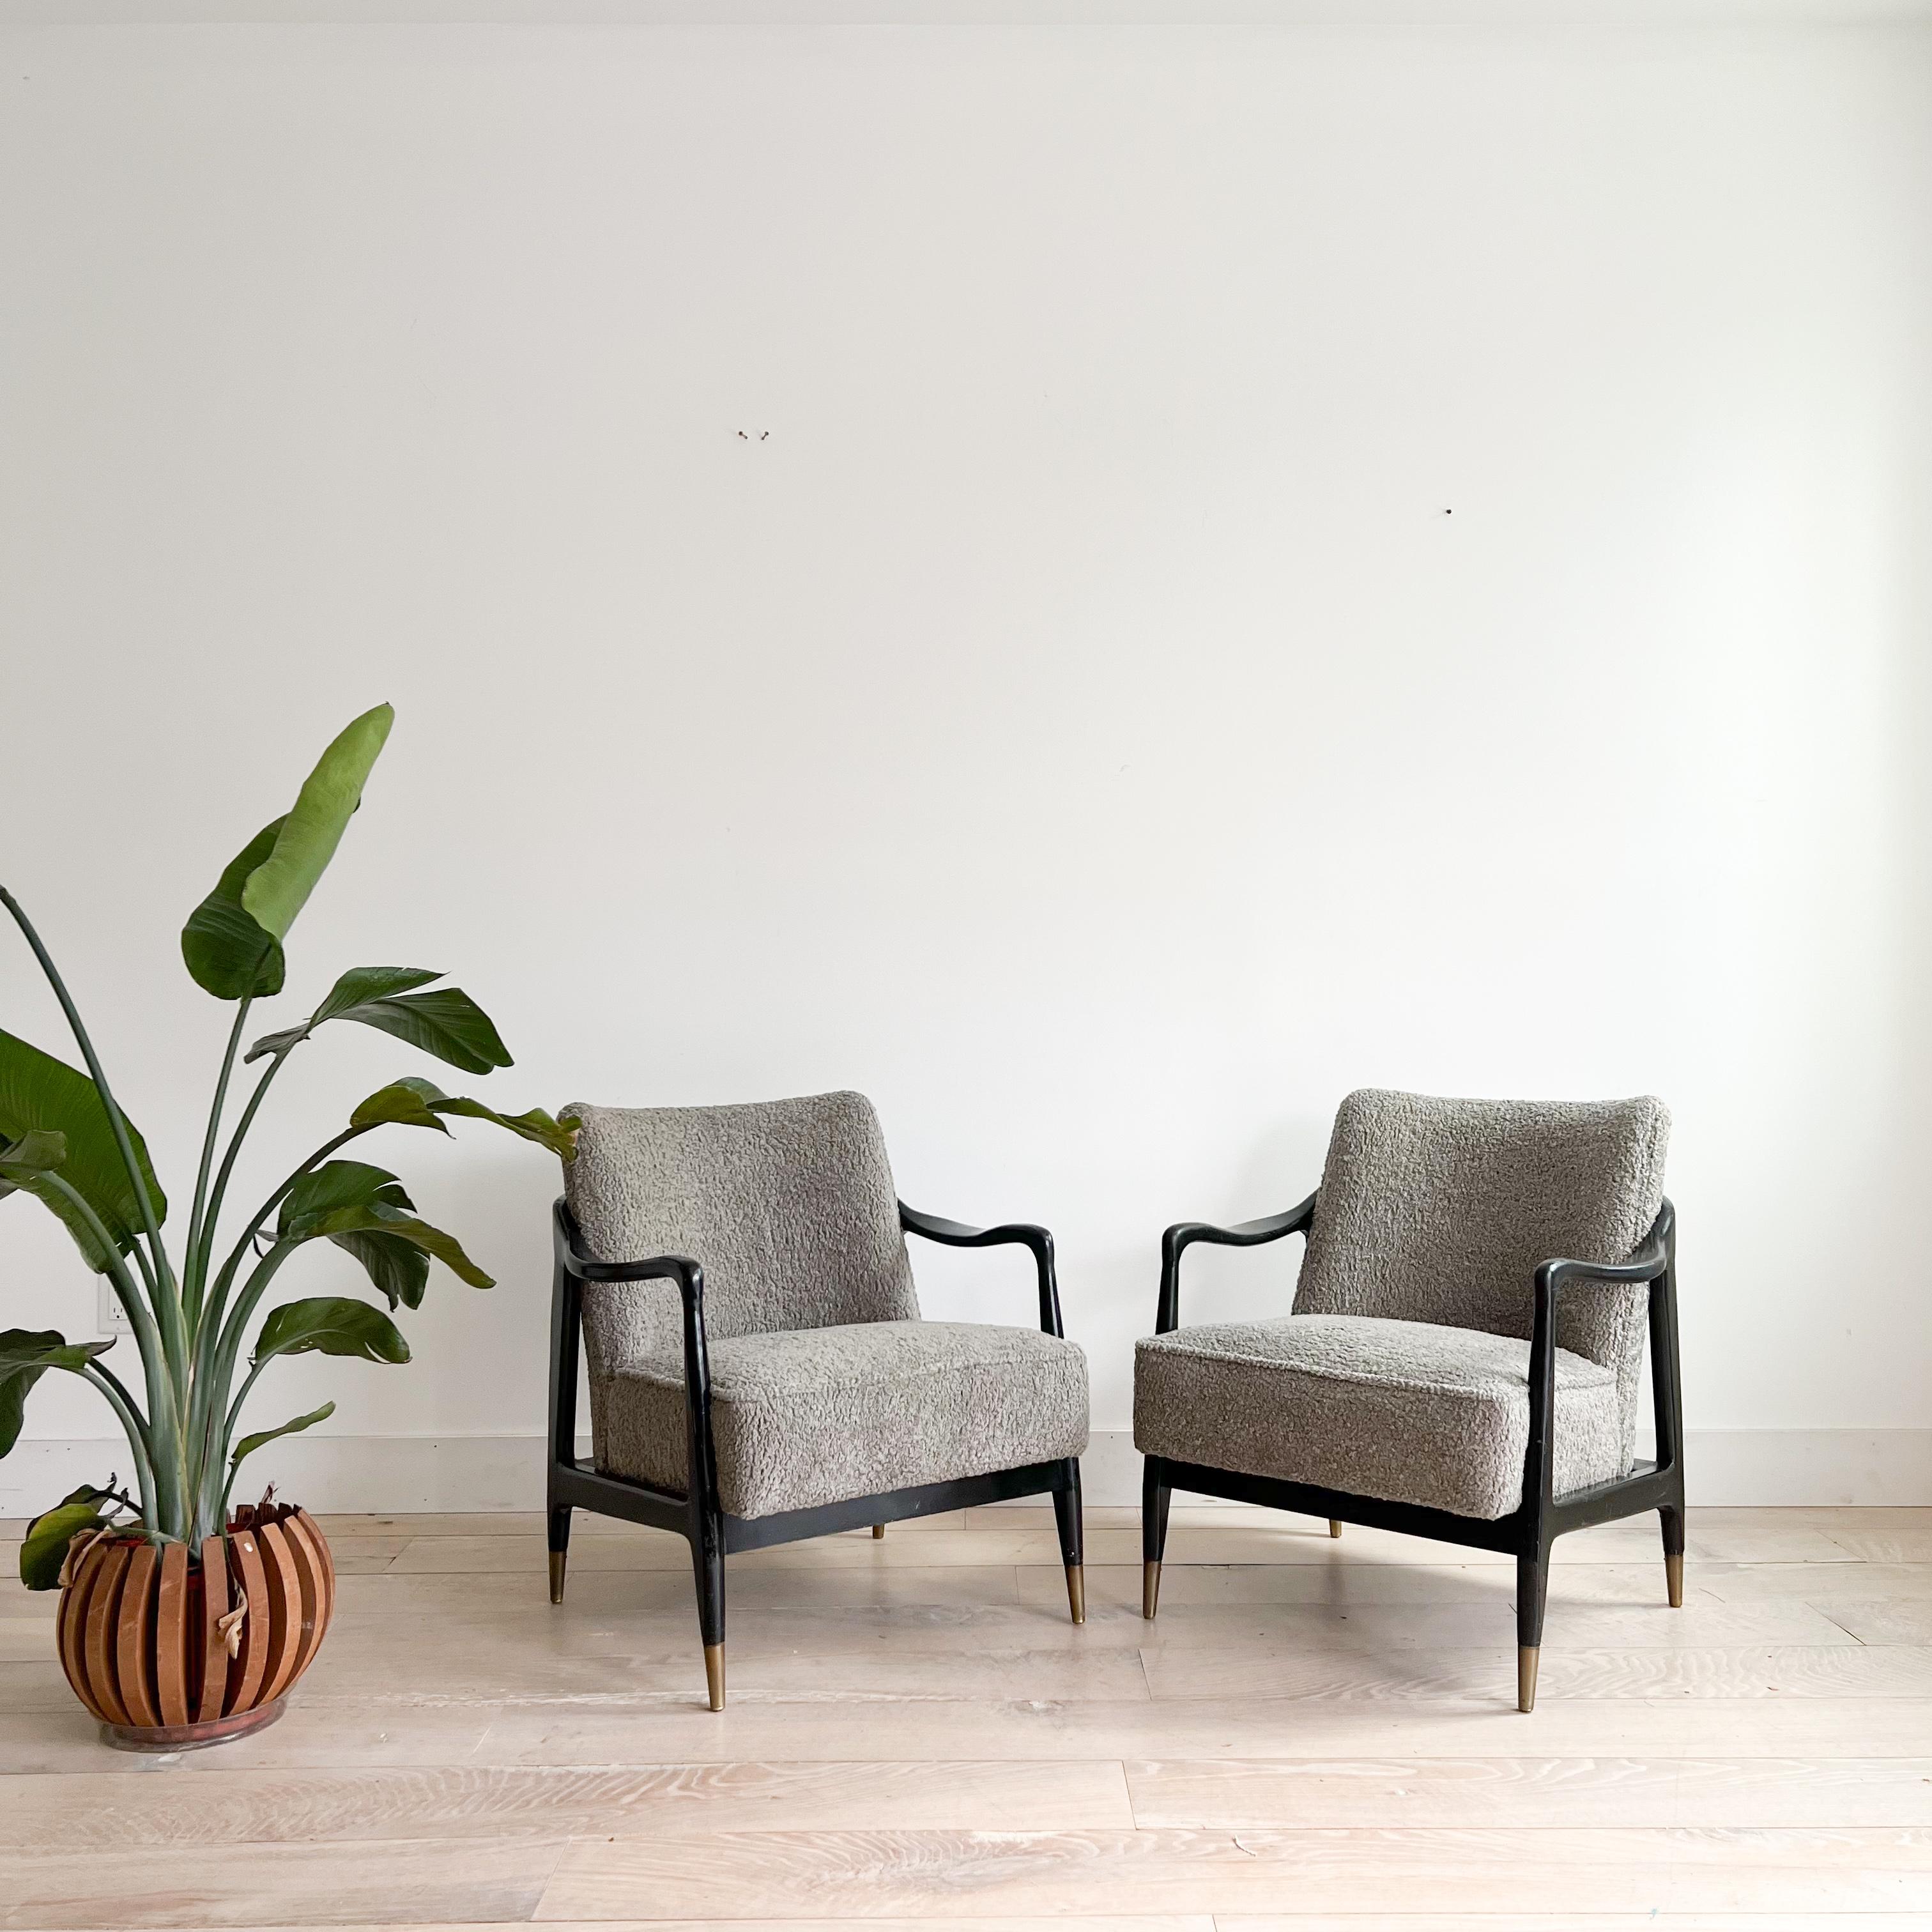 Introducing a captivating pair of mid-century modern lounge chairs inspired by the timeless design aesthetic of Gio Ponti. These chairs exude sophistication and style, making them a perfect addition to any chic interior.

The new grey shearling